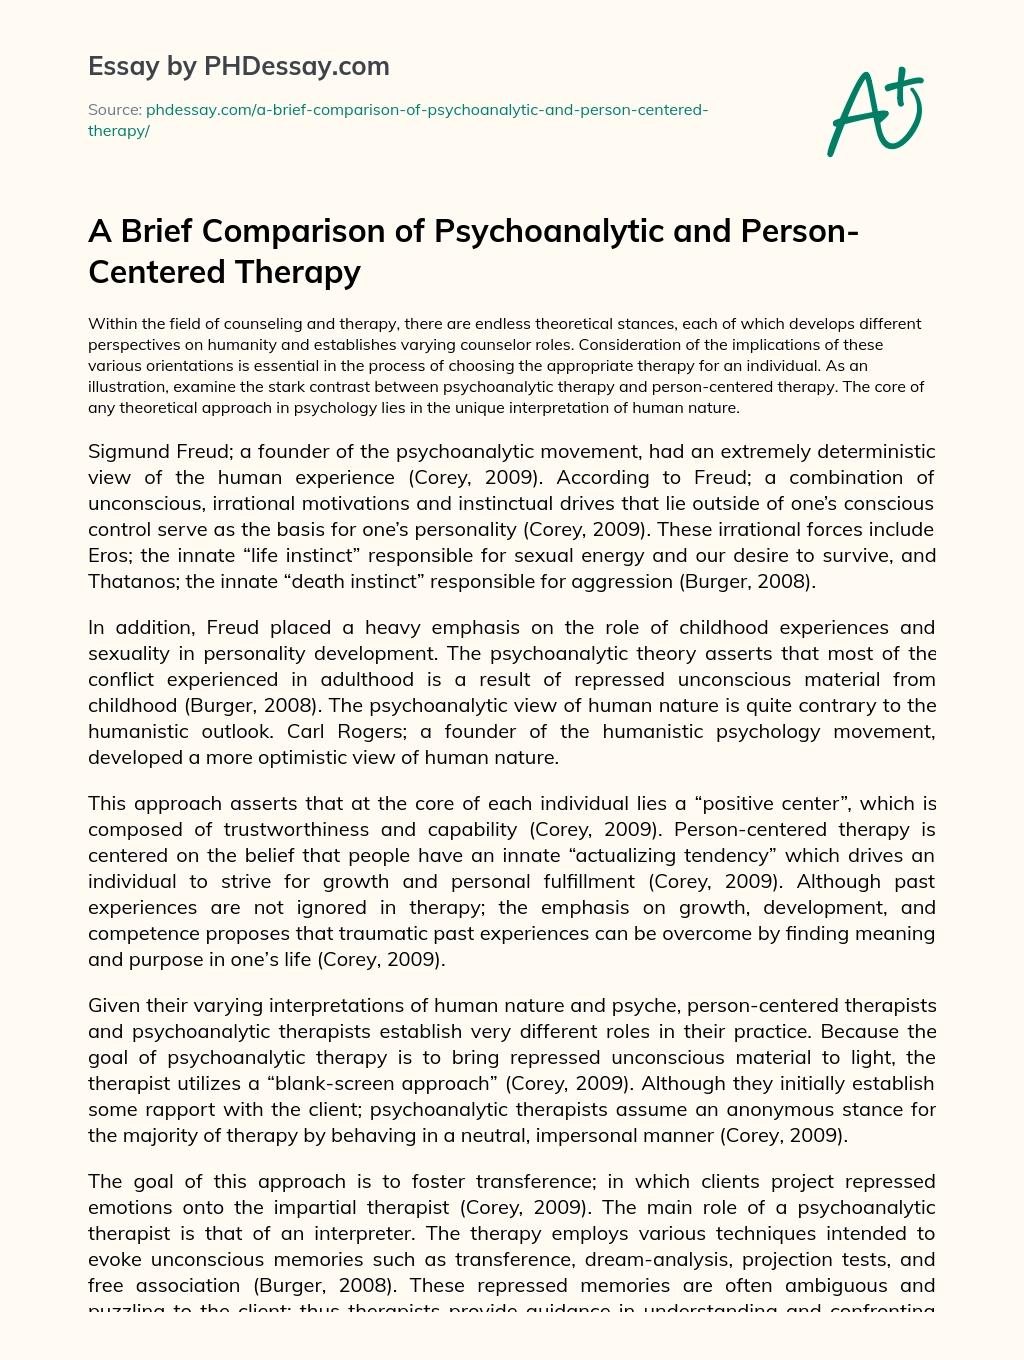 A Brief Comparison of Psychoanalytic and Person-Centered Therapy essay